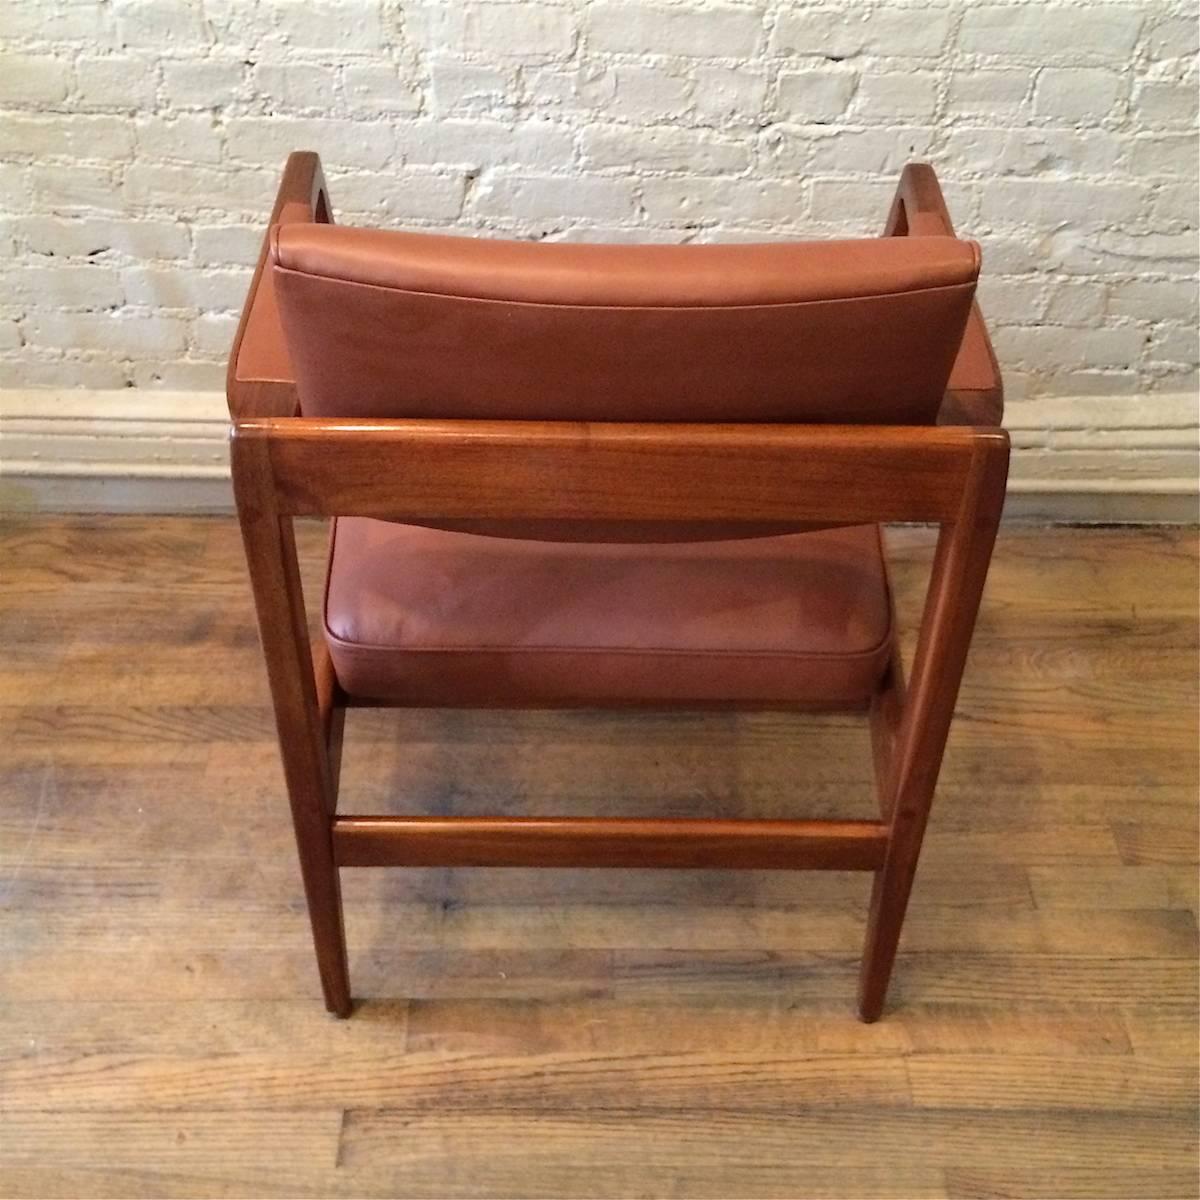 Mid-20th Century Mid-Century Modern Leather Walnut Armchair By Jens Risom For Sale